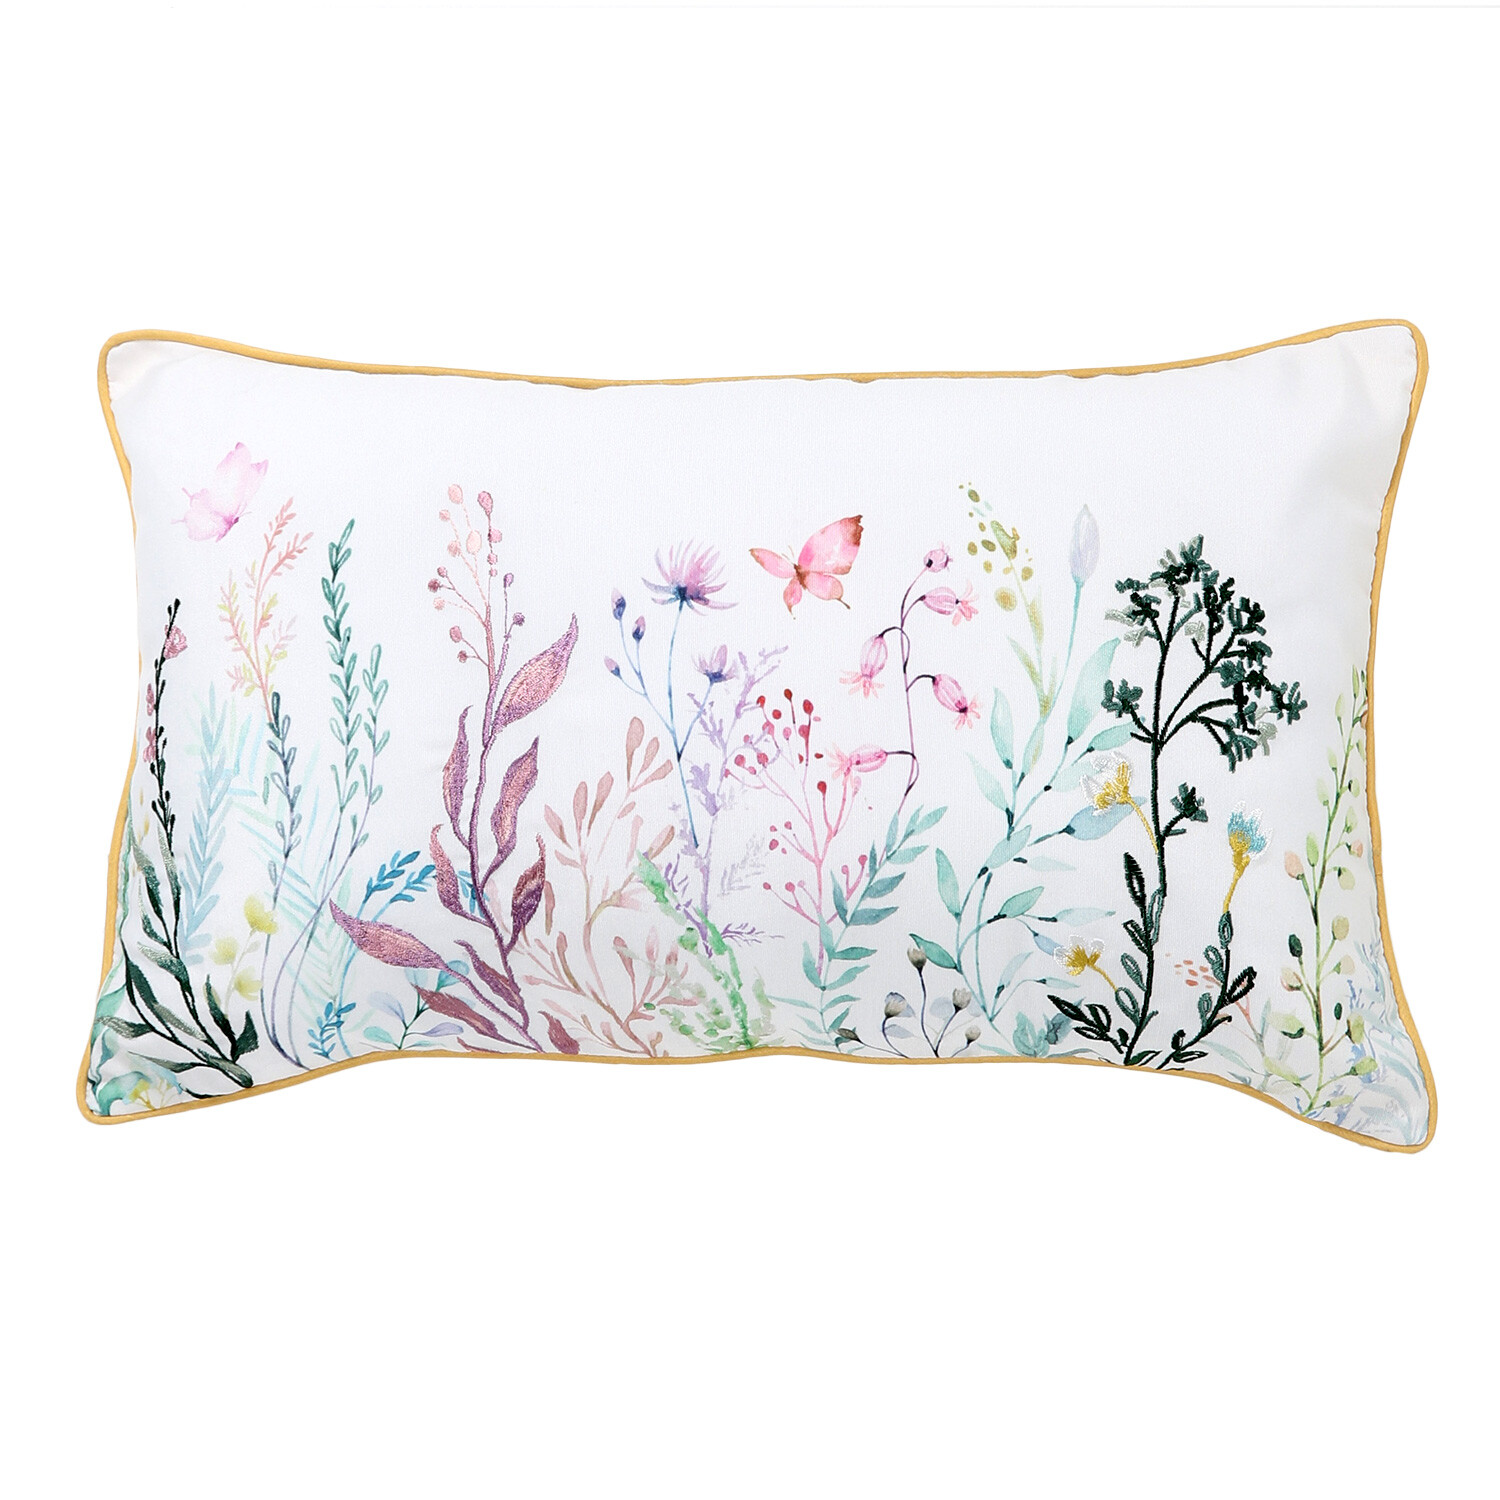 Divante Wildflowers Embroidered Cushion 30 x 50cm Image